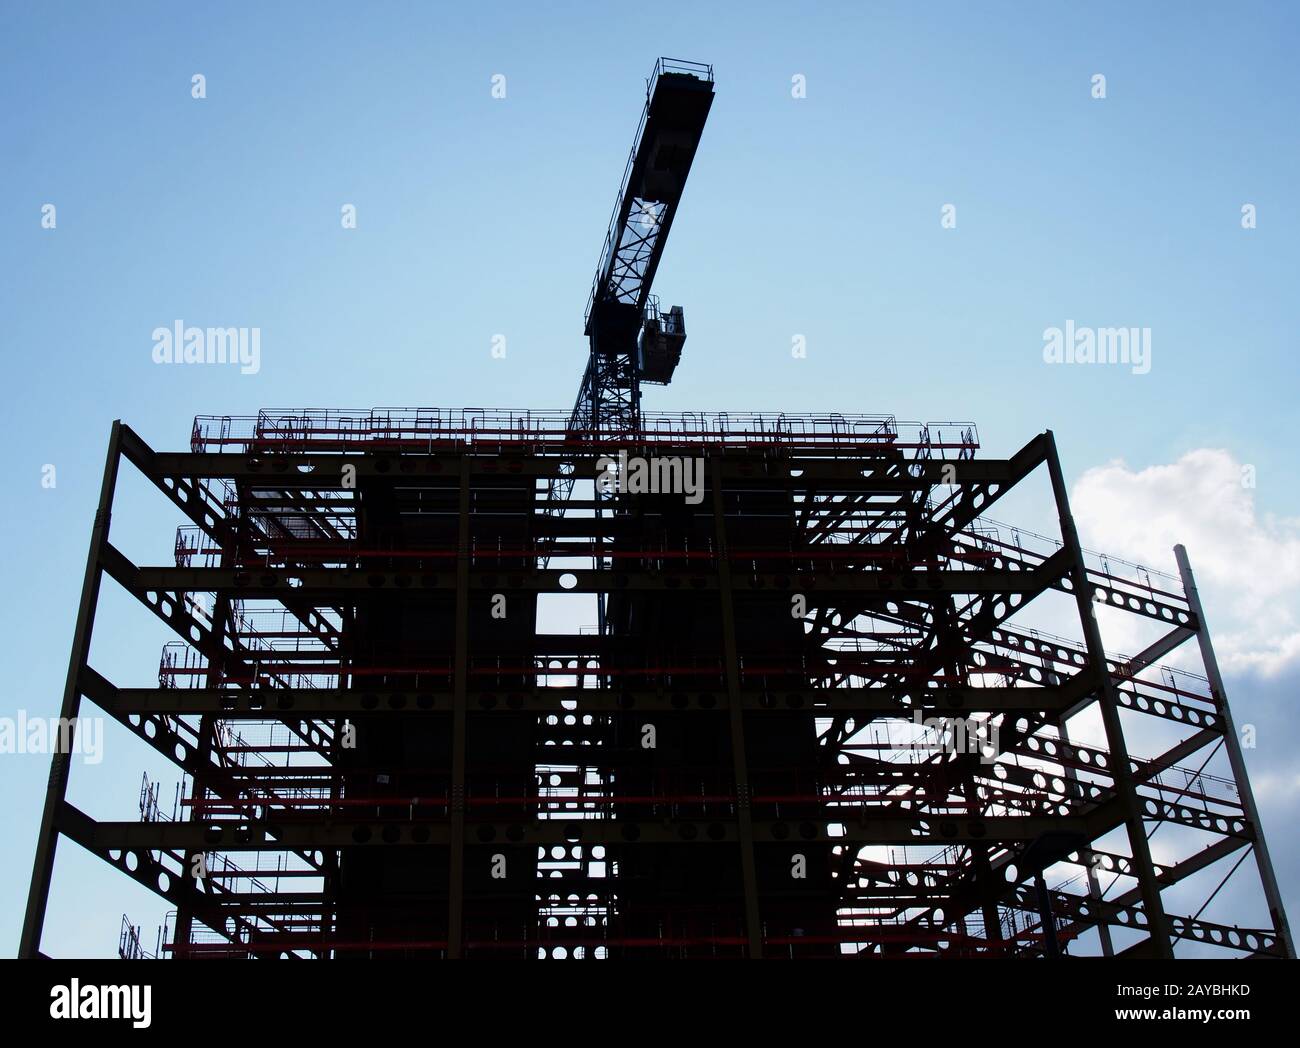 a large construction site in silhouette in the evening with steel girders and a crane in silhouette Stock Photo